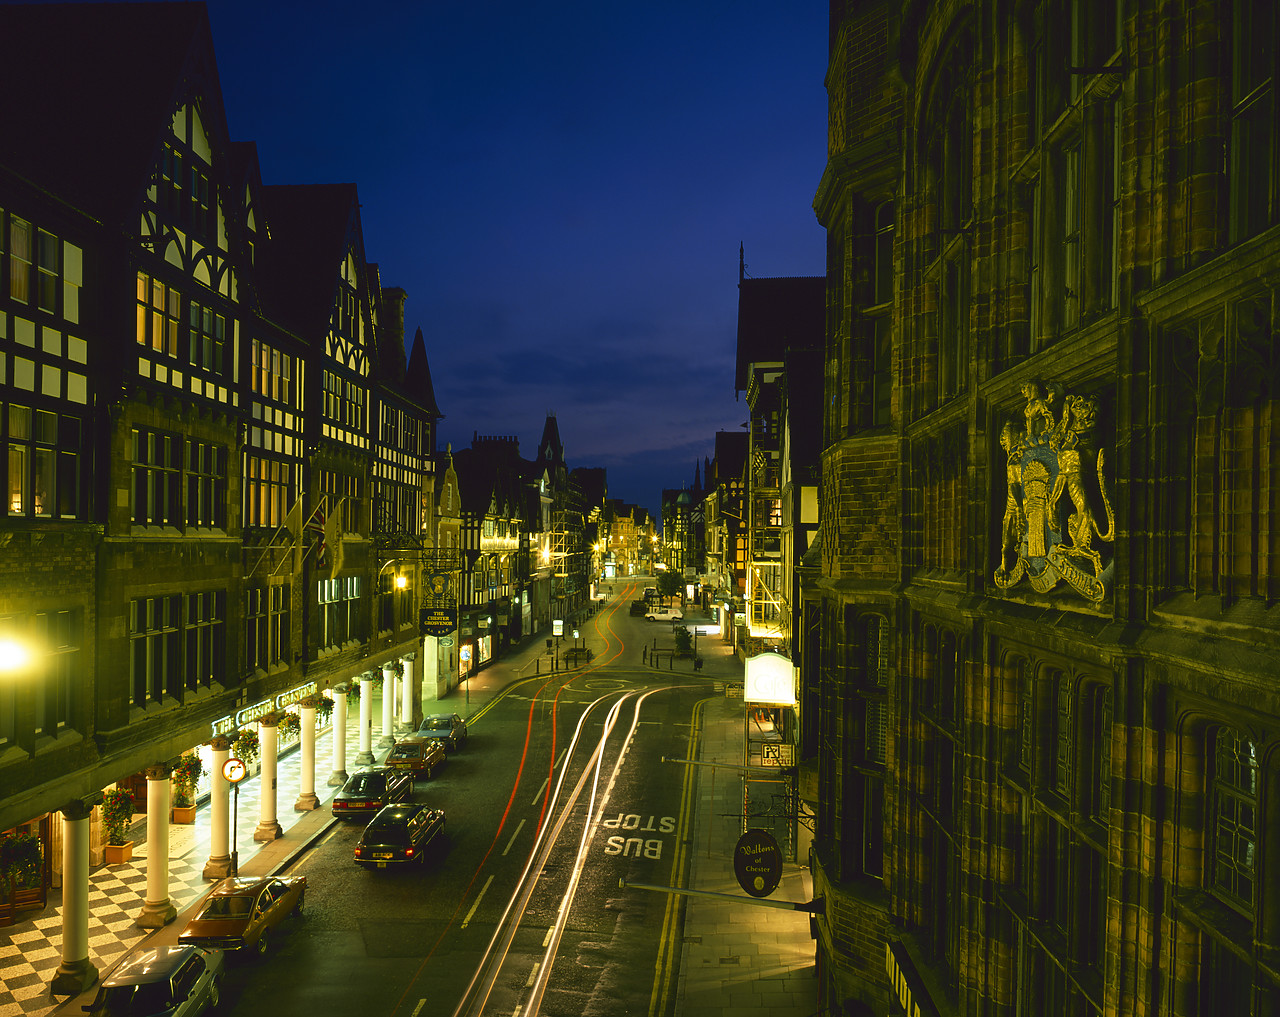 #881347-1 - Eastgate Street at Night, Chester, Cheshire, England